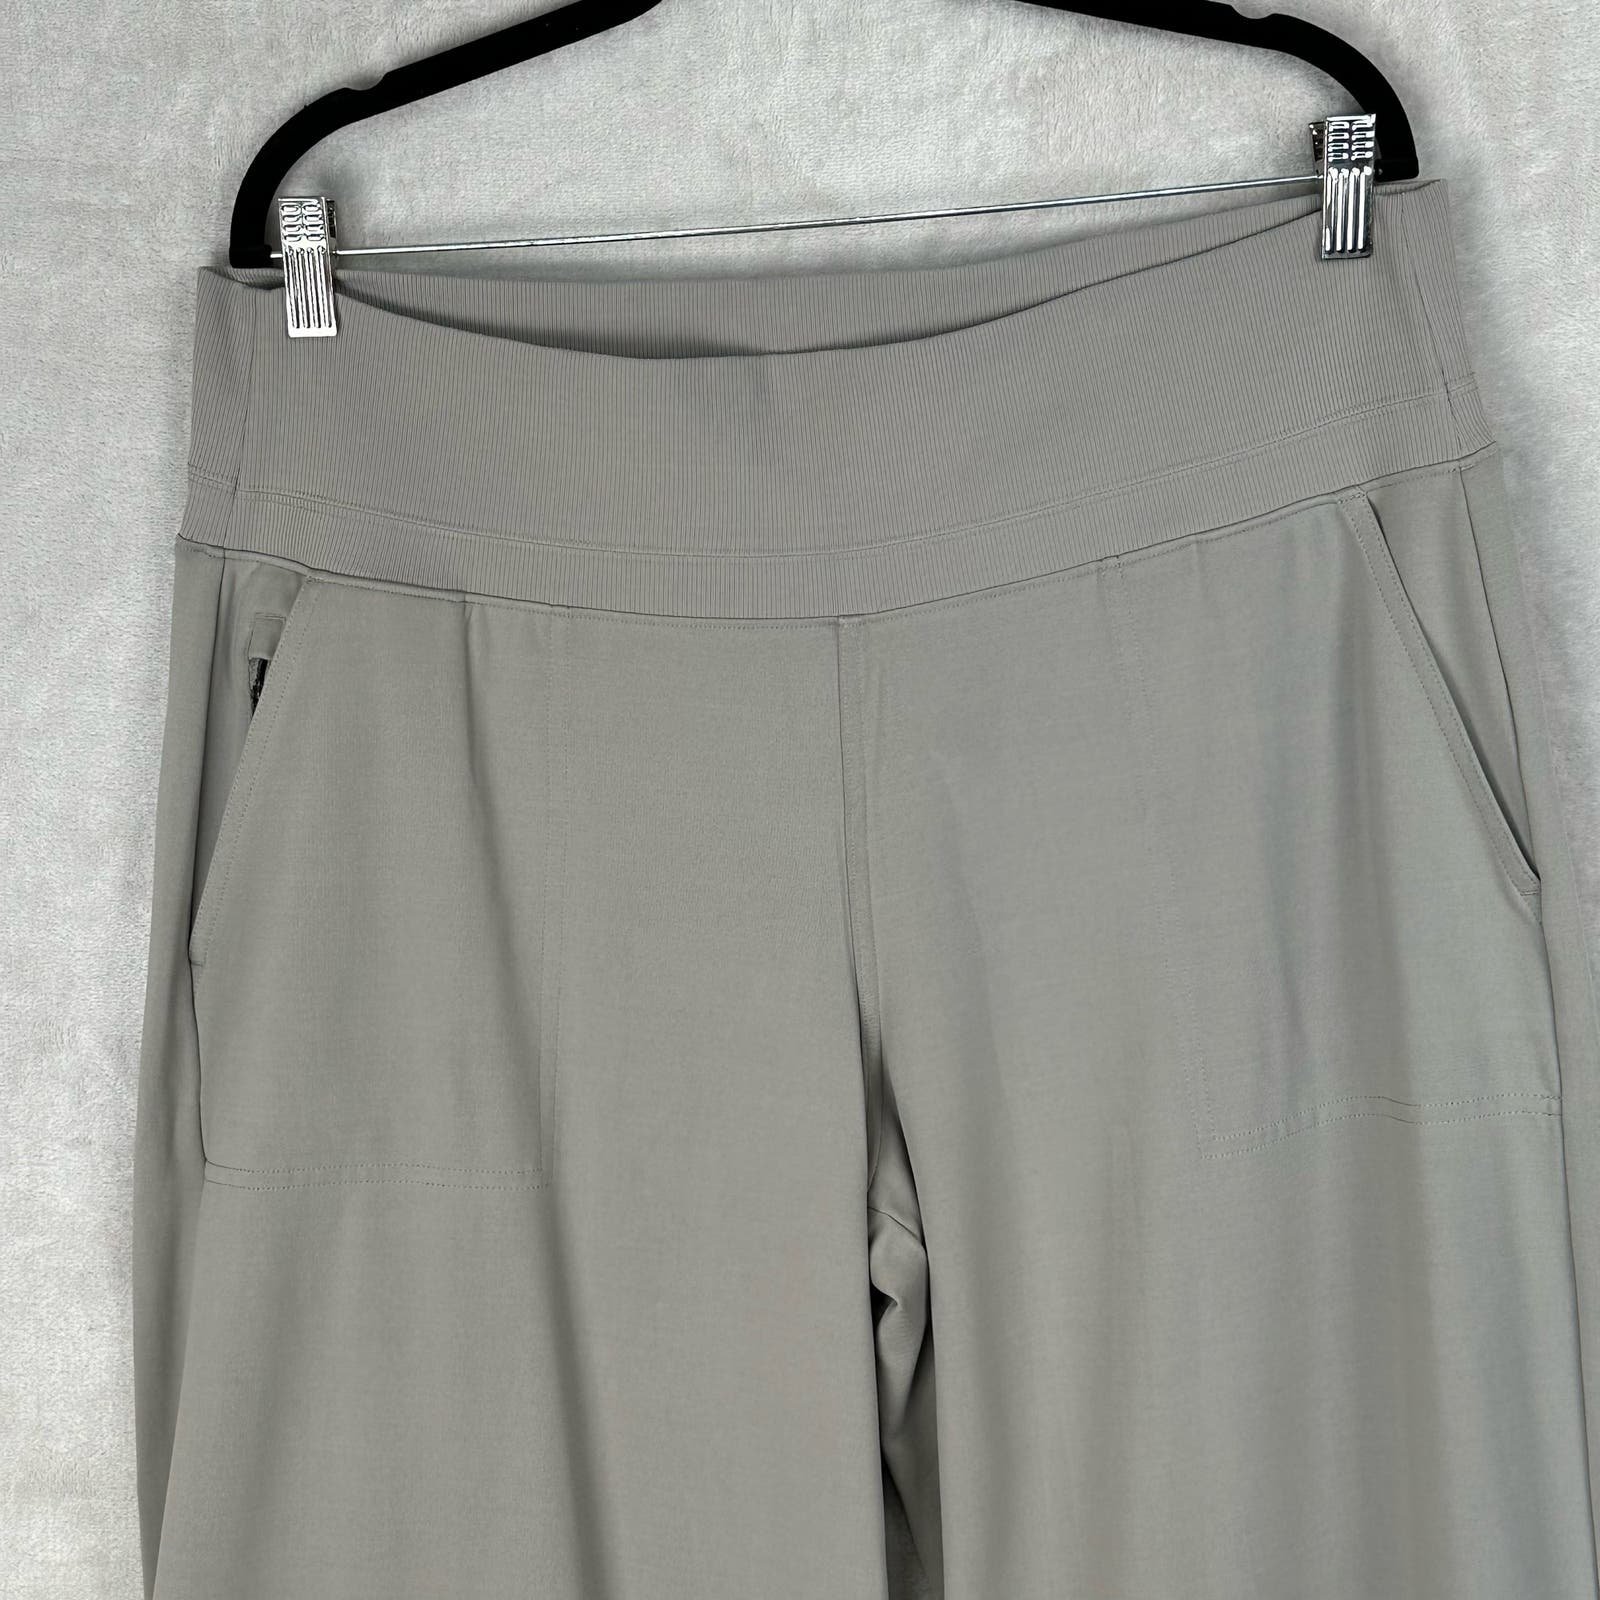 Comfortable Athleta Pants Womens Extra Large Gray Wide Leg Pull On Pockets Stretch Comfort Fw85E5iaZ just buy it